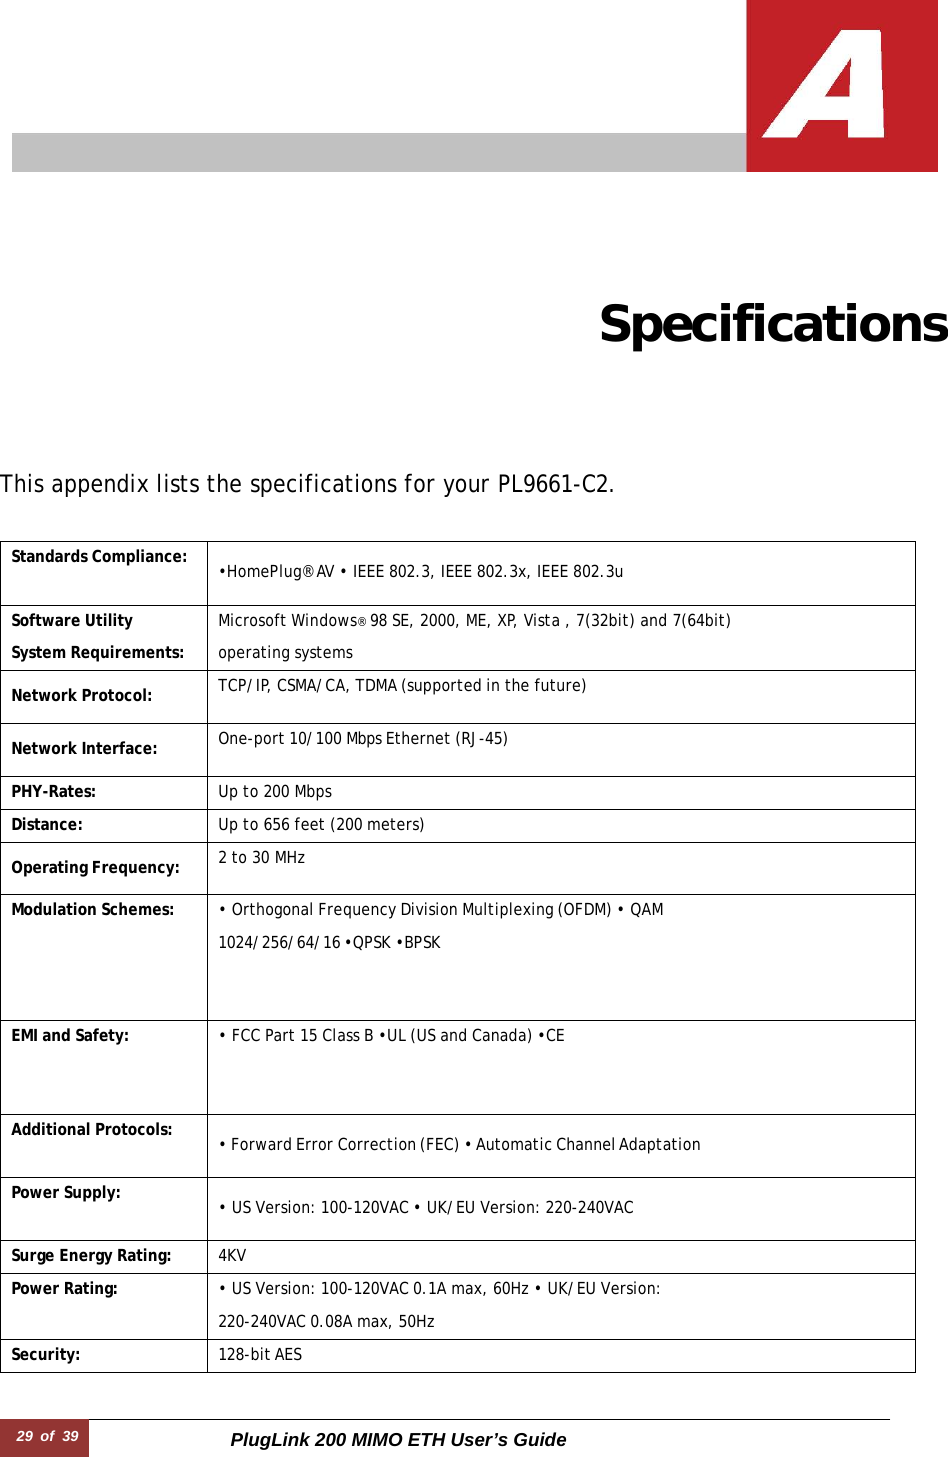 29  of  39 PlugLink 200 MIMO ETH User’s Guide      Specifications This appendix lists the specifications for your PL9661-C2.   Standards Compliance: •HomePlug® AV • IEEE 802.3, IEEE 802.3x, IEEE 802.3u Software Utility  System Requirements: Microsoft Windows® 98 SE, 2000, ME, XP, Vista , 7(32bit) and 7(64bit)  operating systems  Network Protocol: TCP/IP, CSMA/CA, TDMA (supported in the future)  Network Interface: One-port 10/100 Mbps Ethernet (RJ-45)  PHY-Rates: Up to 200 Mbps Distance: Up to 656 feet (200 meters)  Operating Frequency: 2 to 30 MHz Modulation Schemes: • Orthogonal Frequency Division Multiplexing (OFDM) • QAM  1024/256/64/16 •QPSK •BPSK EMI and Safety: • FCC Part 15 Class B •UL (US and Canada) •CE Additional Protocols: • Forward Error Correction (FEC) • Automatic Channel Adaptation Power Supply: • US Version: 100-120VAC • UK/EU Version: 220-240VAC Surge Energy Rating: 4KV Power Rating: • US Version: 100-120VAC 0.1A max, 60Hz • UK/EU Version:  220-240VAC 0.08A max, 50Hz  Security: 128-bit AES 